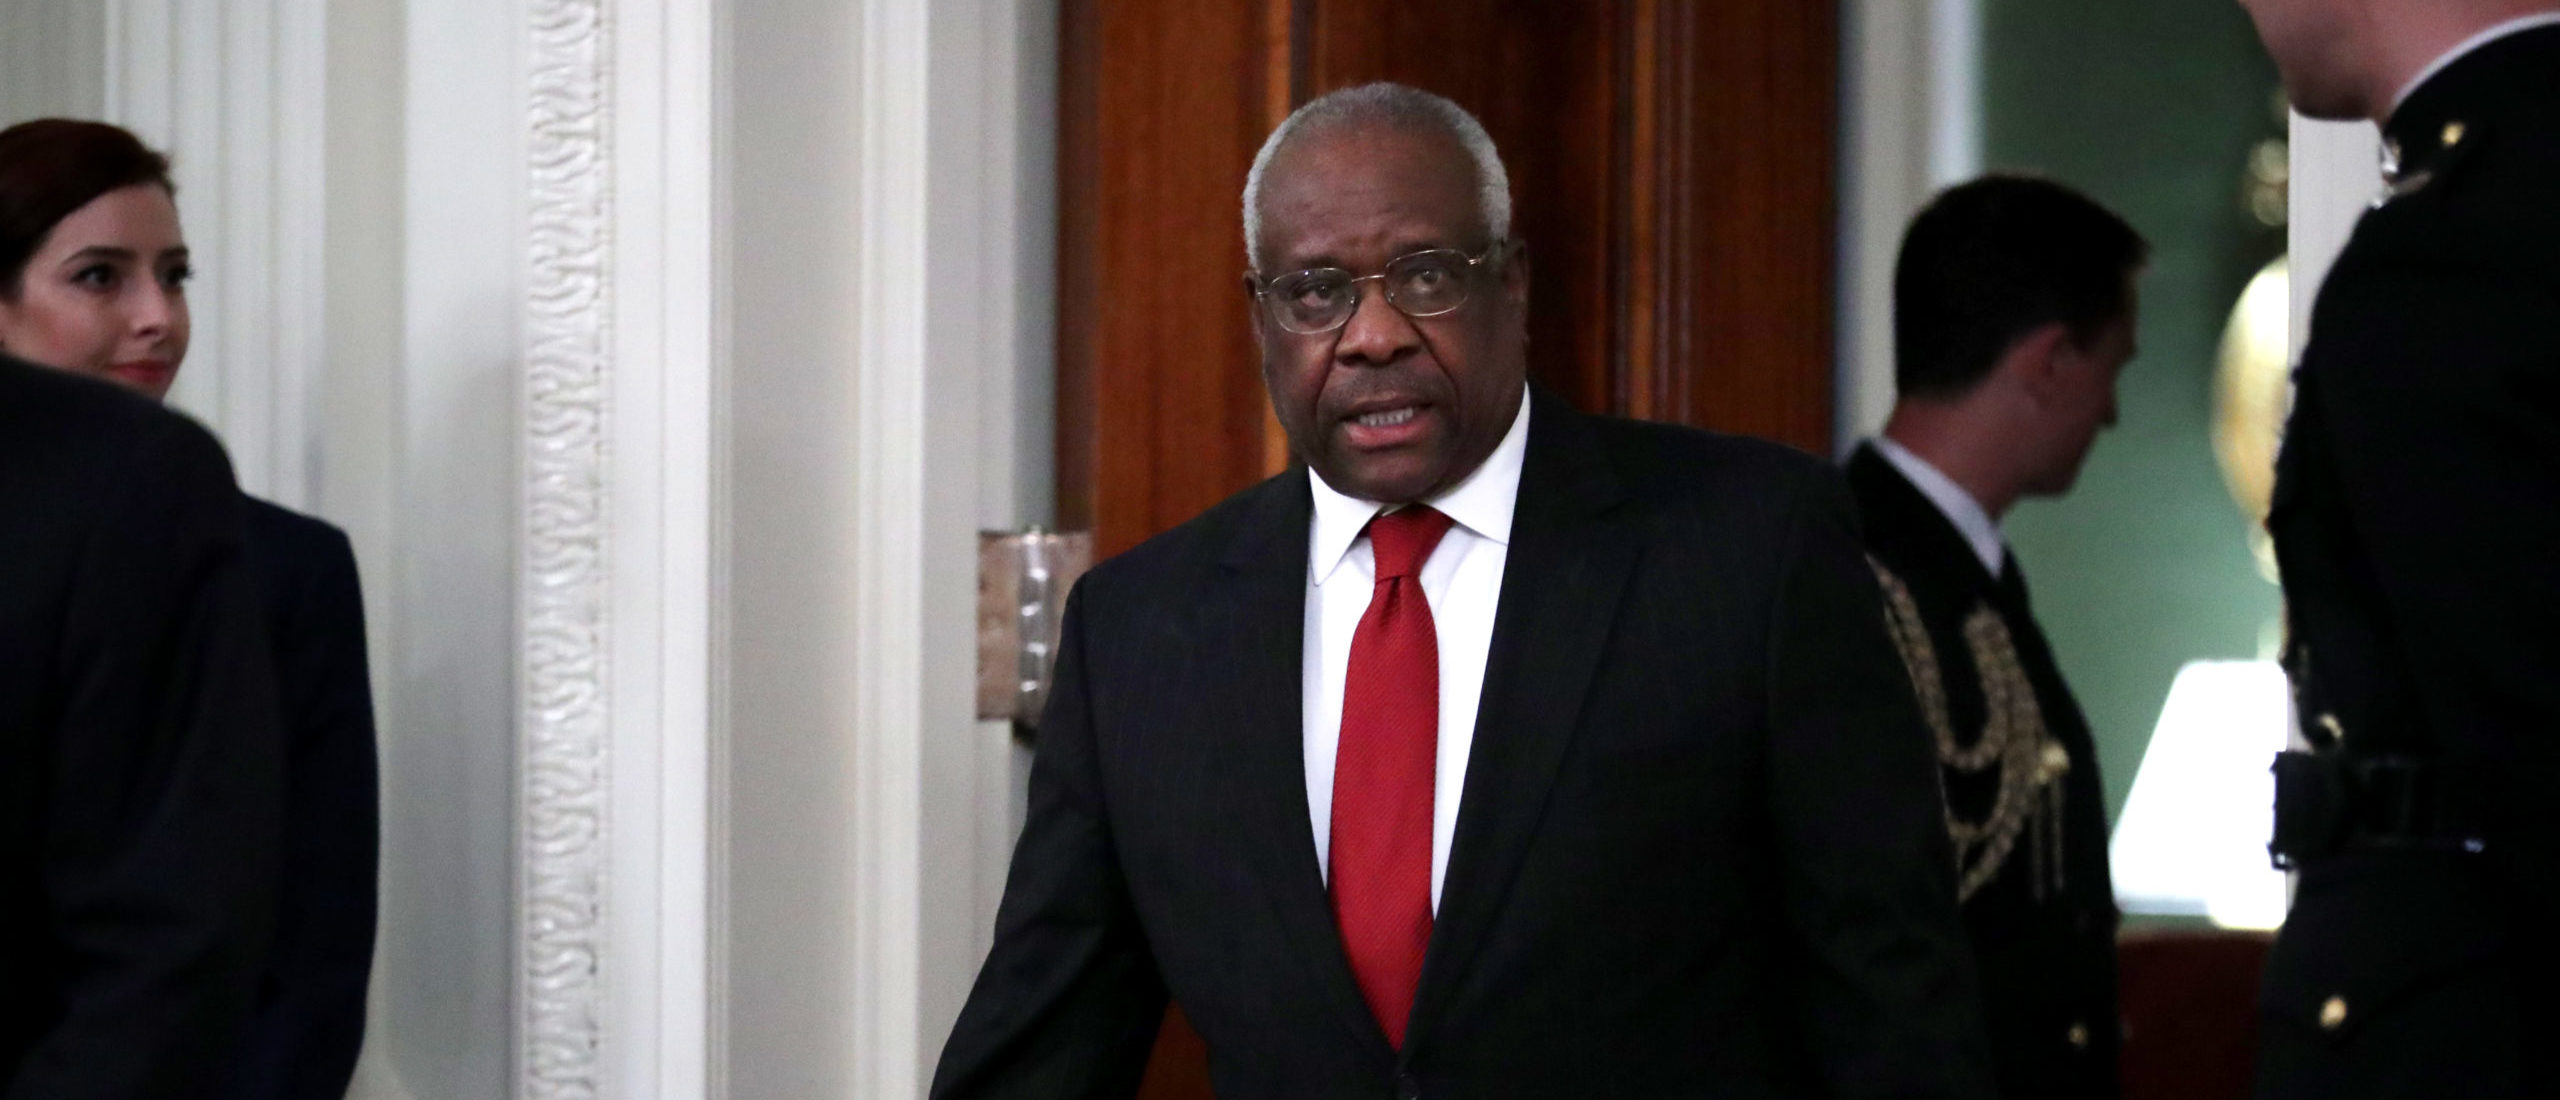 WASHINGTON, DC - OCTOBER 08: U.S. Supreme Court Associate Justice Clarence Thomas arrives for the ceremonial swearing in of Associate Justice Brett Kavanaugh in the East Room of the White House October 08, 2018 in Washington, DC. Kavanaugh was confirmed in the Senate 50-48 after a contentious process that included several women accusing Kavanaugh of sexual assault. Kavanaugh has denied the allegations. (Photo by Chip Somodevilla/Getty Images)